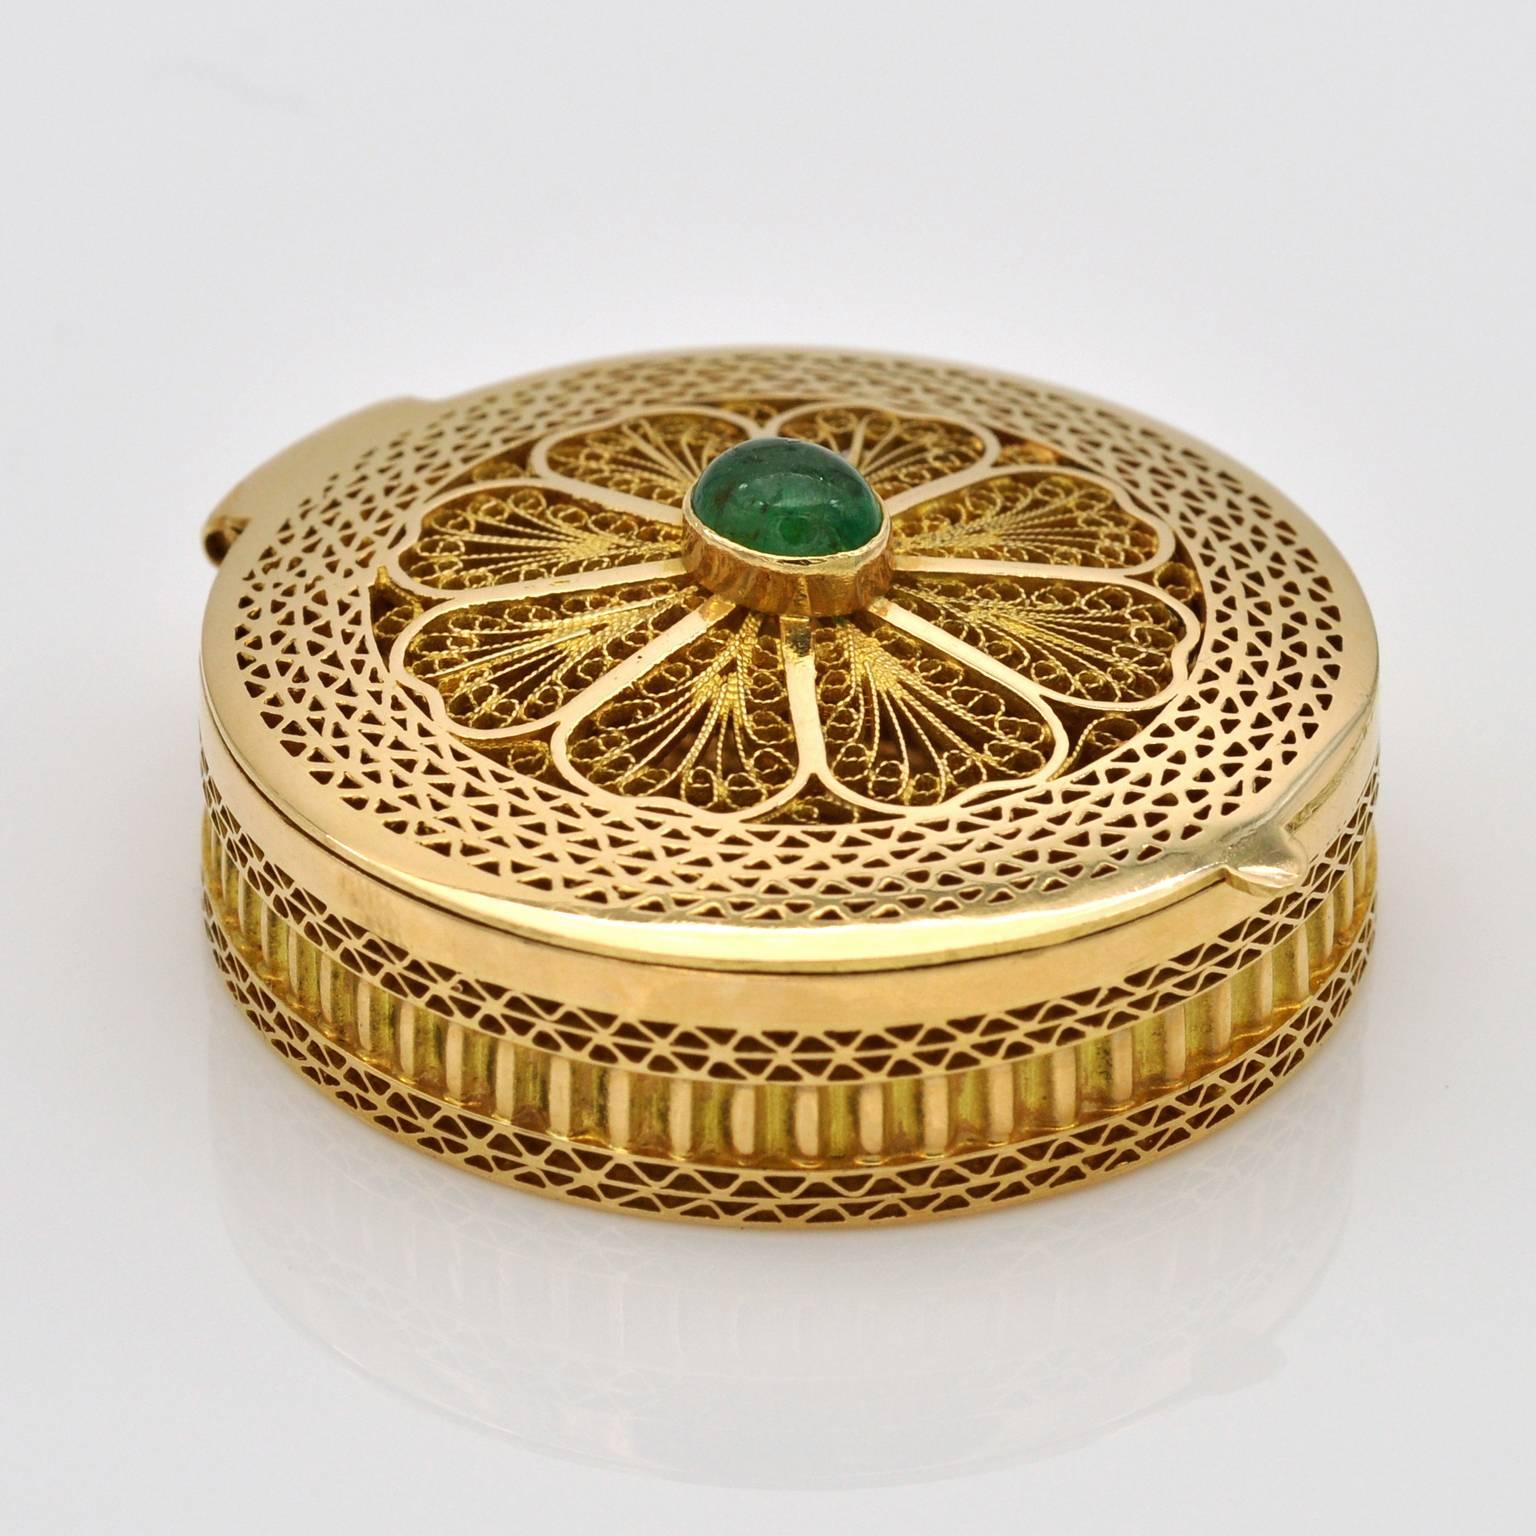 Very nicely crafted round pill box. Filigree 18KT yellow gold with an cabochon emerald  set on its top

Max height : 1.6 cm - 0.63in
Height Without  emerald: 1.25cm - 0.5in
diametre: 3.8cm - 1.5in